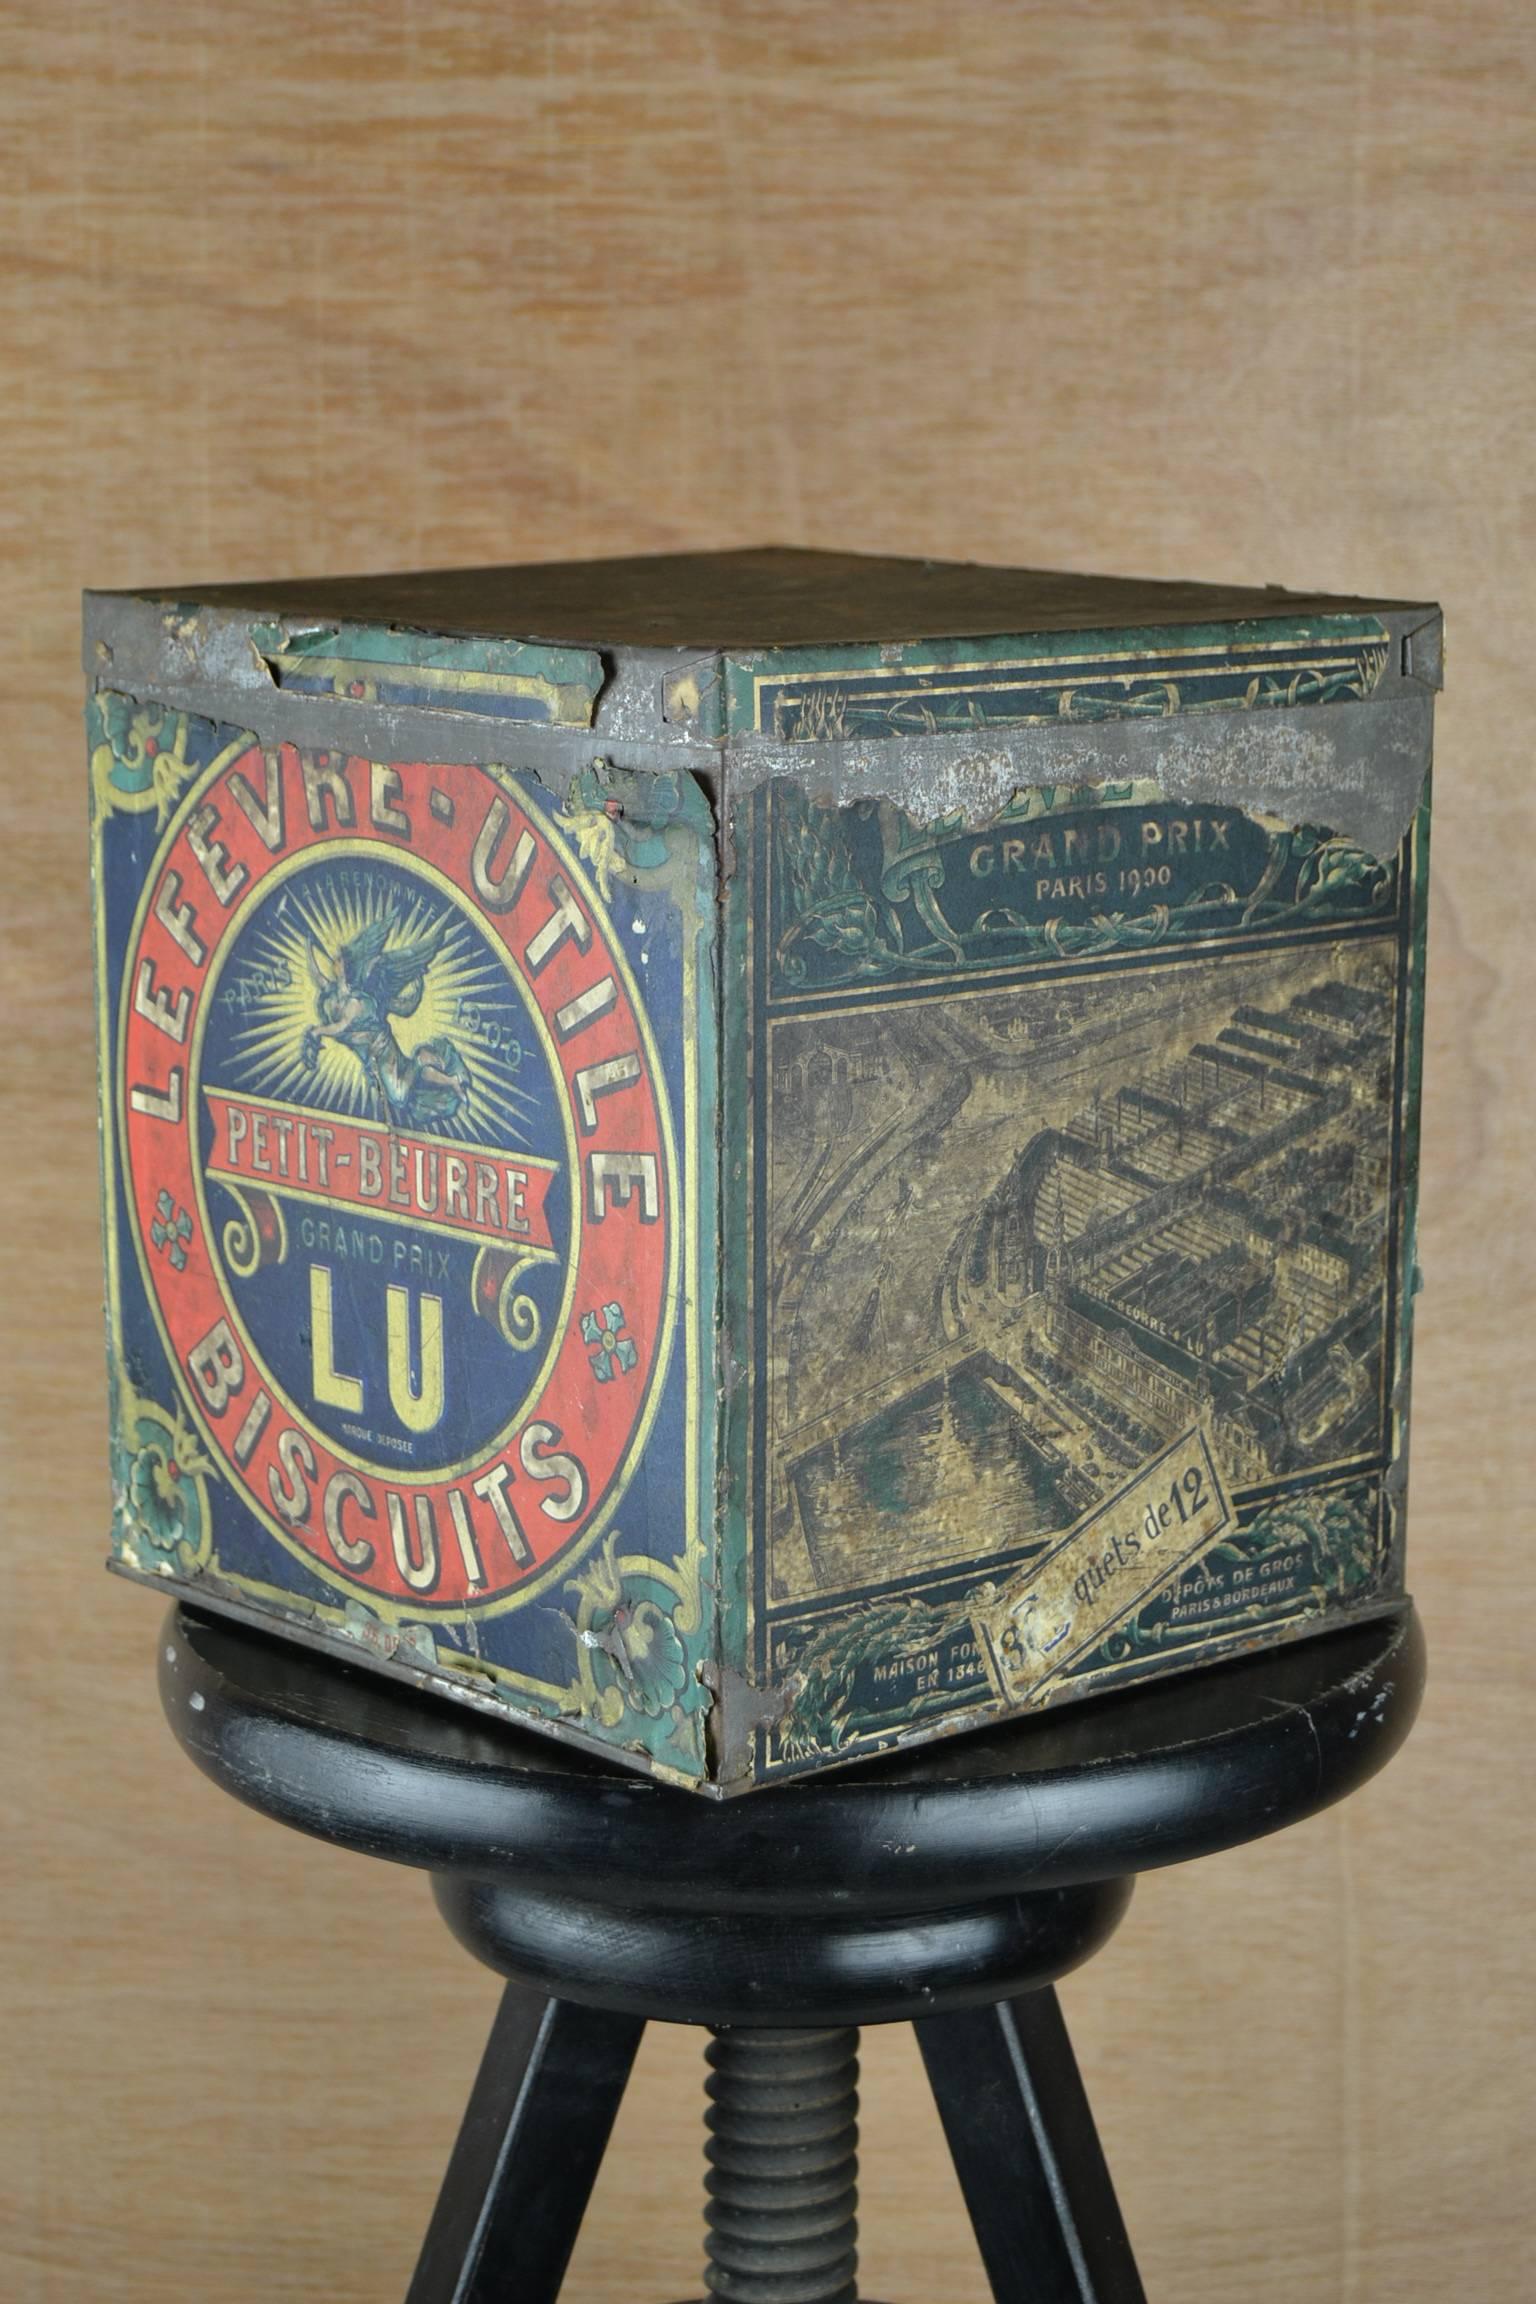 Antique biscuit box Lu Lefevre - Utile Nantes.
Metal box wrapped with paper with lithographic drawings.
Despite the age, the paper is still in very good condition, what makes the box a unique collectable item.
It was ment for the famous Petit -